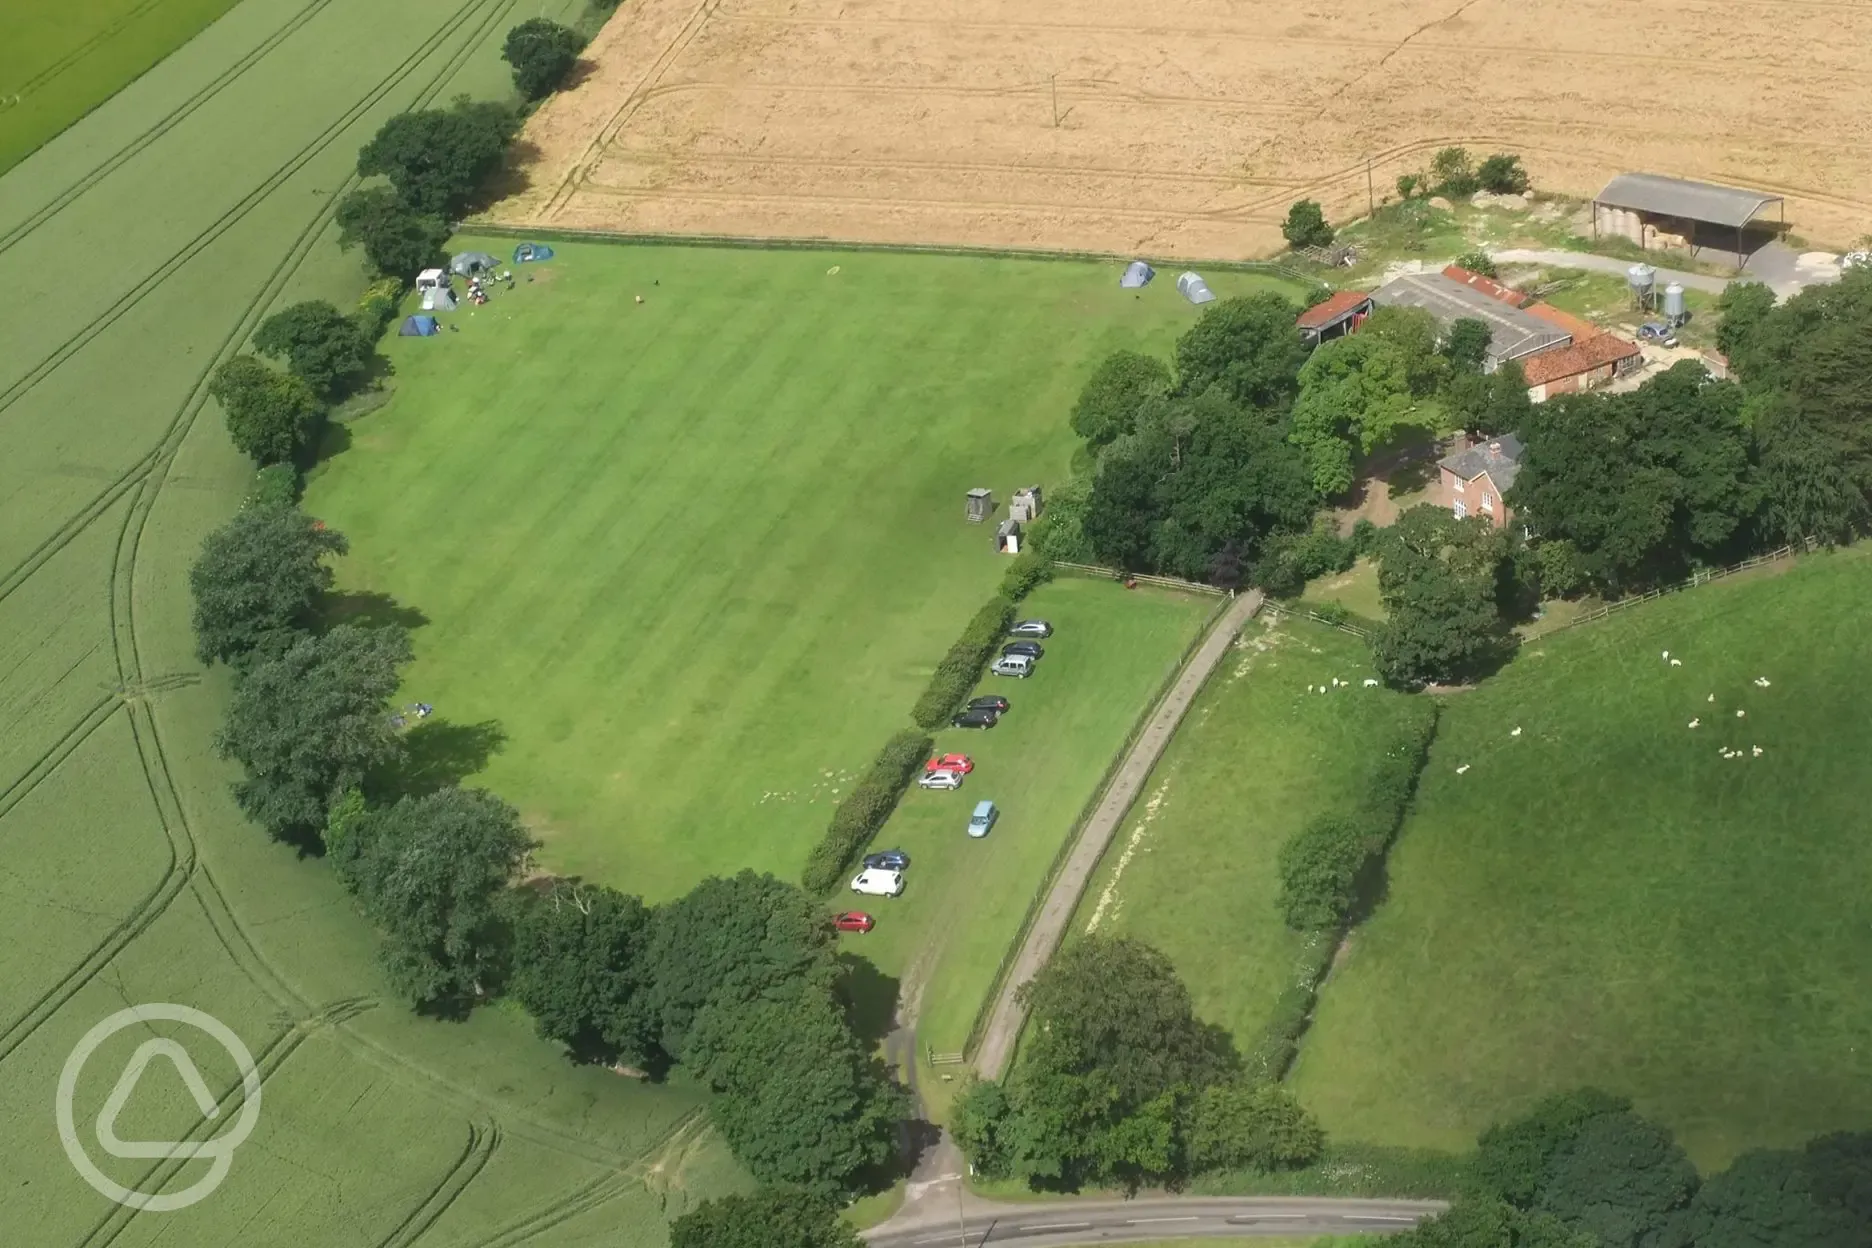 Aerial view of The Old Vicarage Campsite